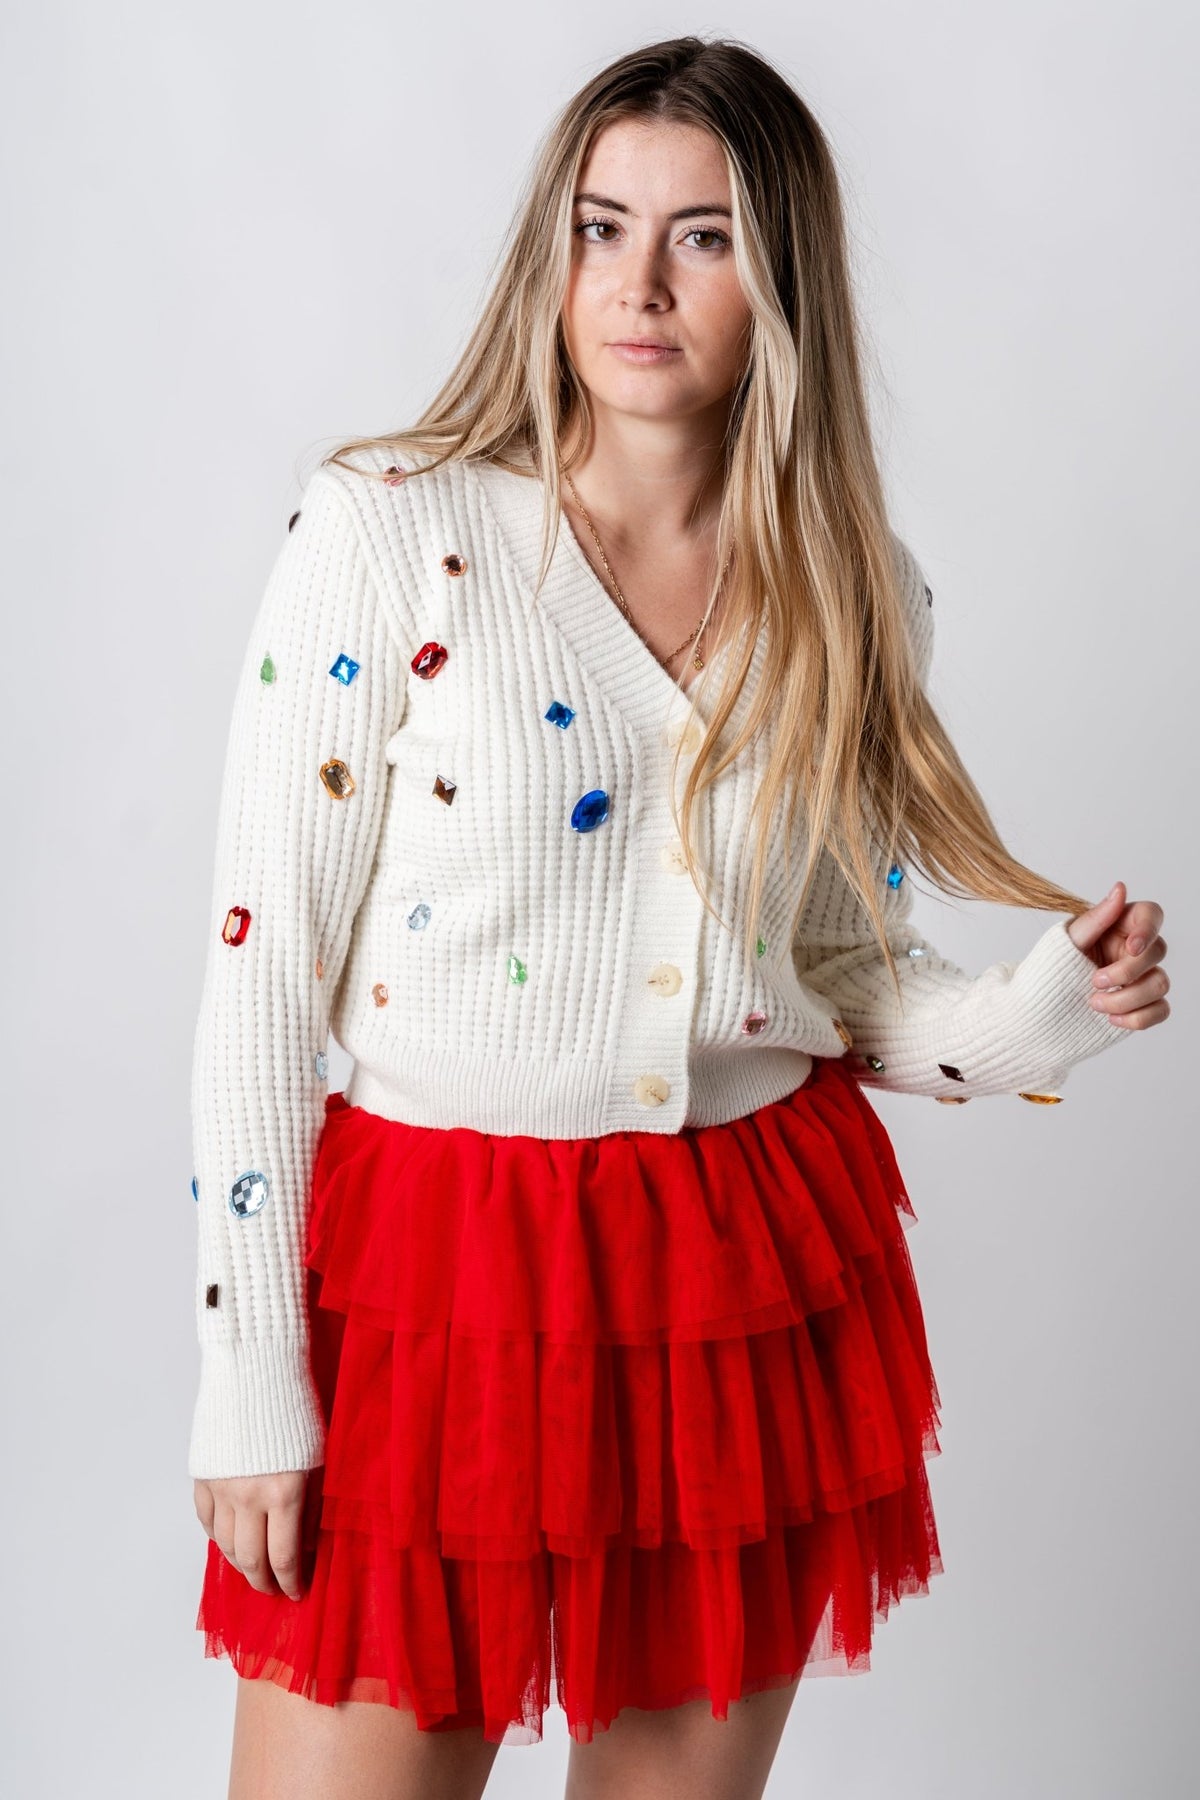 Jewel detail sweater cardigan ivory - Trendy Holiday Apparel at Lush Fashion Lounge Boutique in Oklahoma City